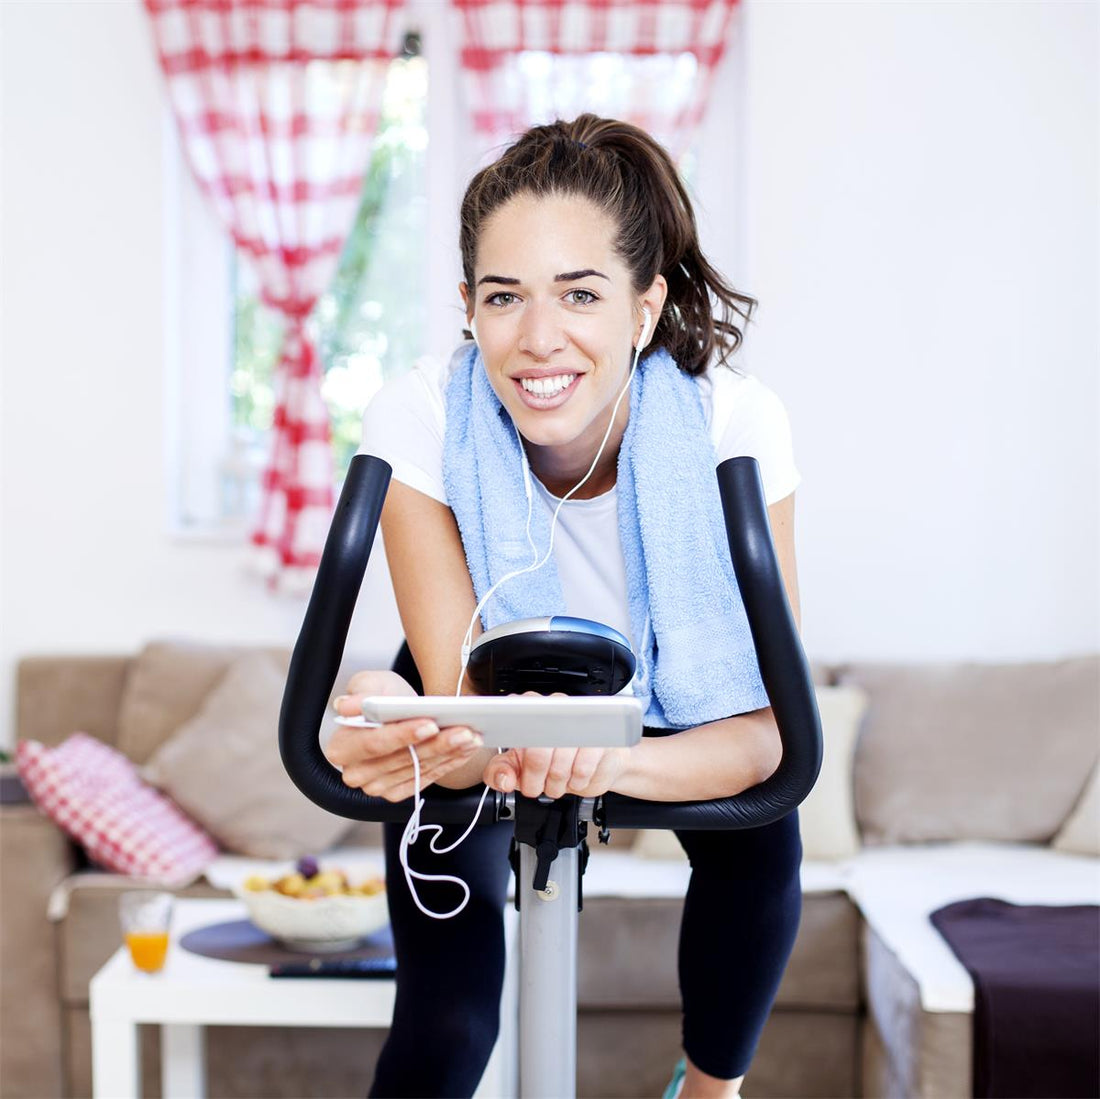 Are Exercise Bikes Good For Beginners?